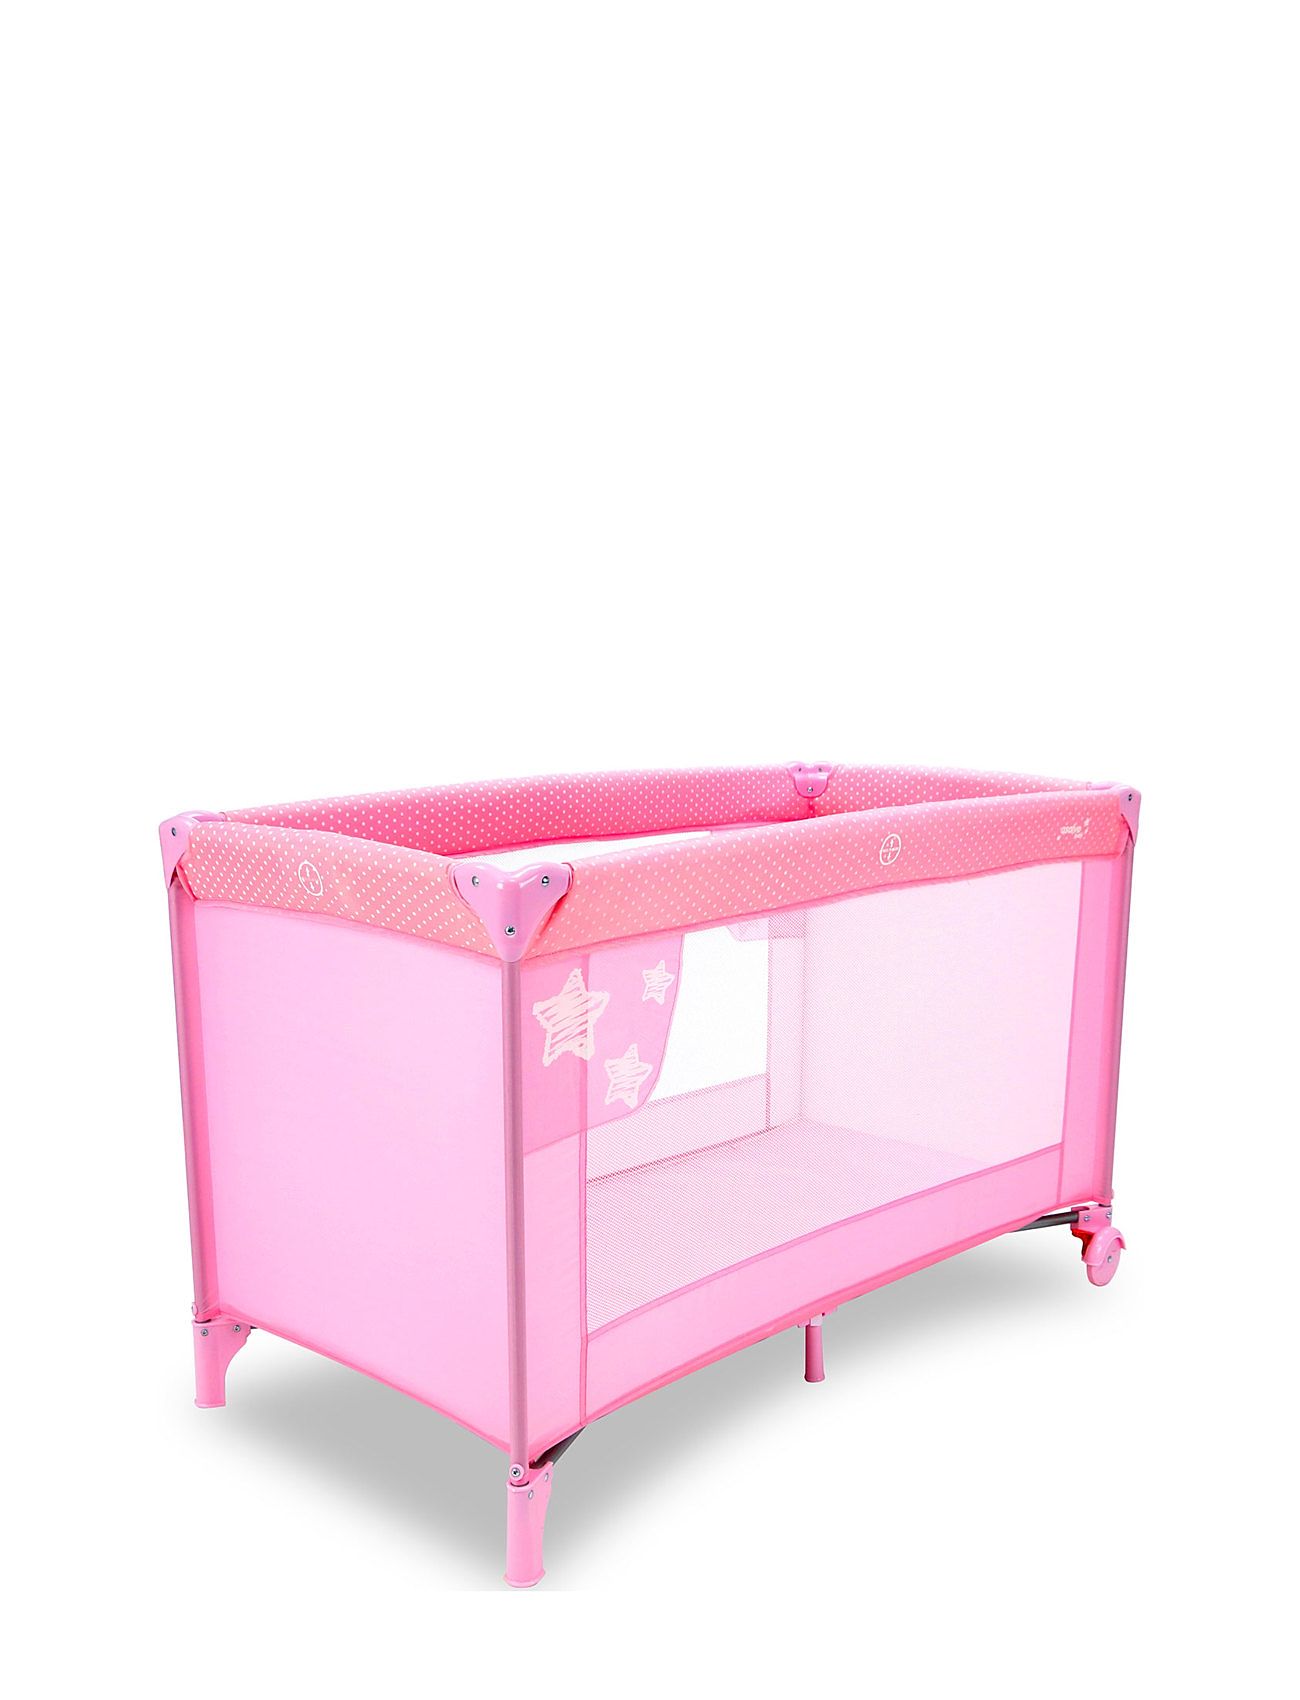 Asalvo Travel Cot Baleares Stars Pink Baby & Maternity Baby Sleep Baby Beds & Accessories Travel Beds Pink Asalvo